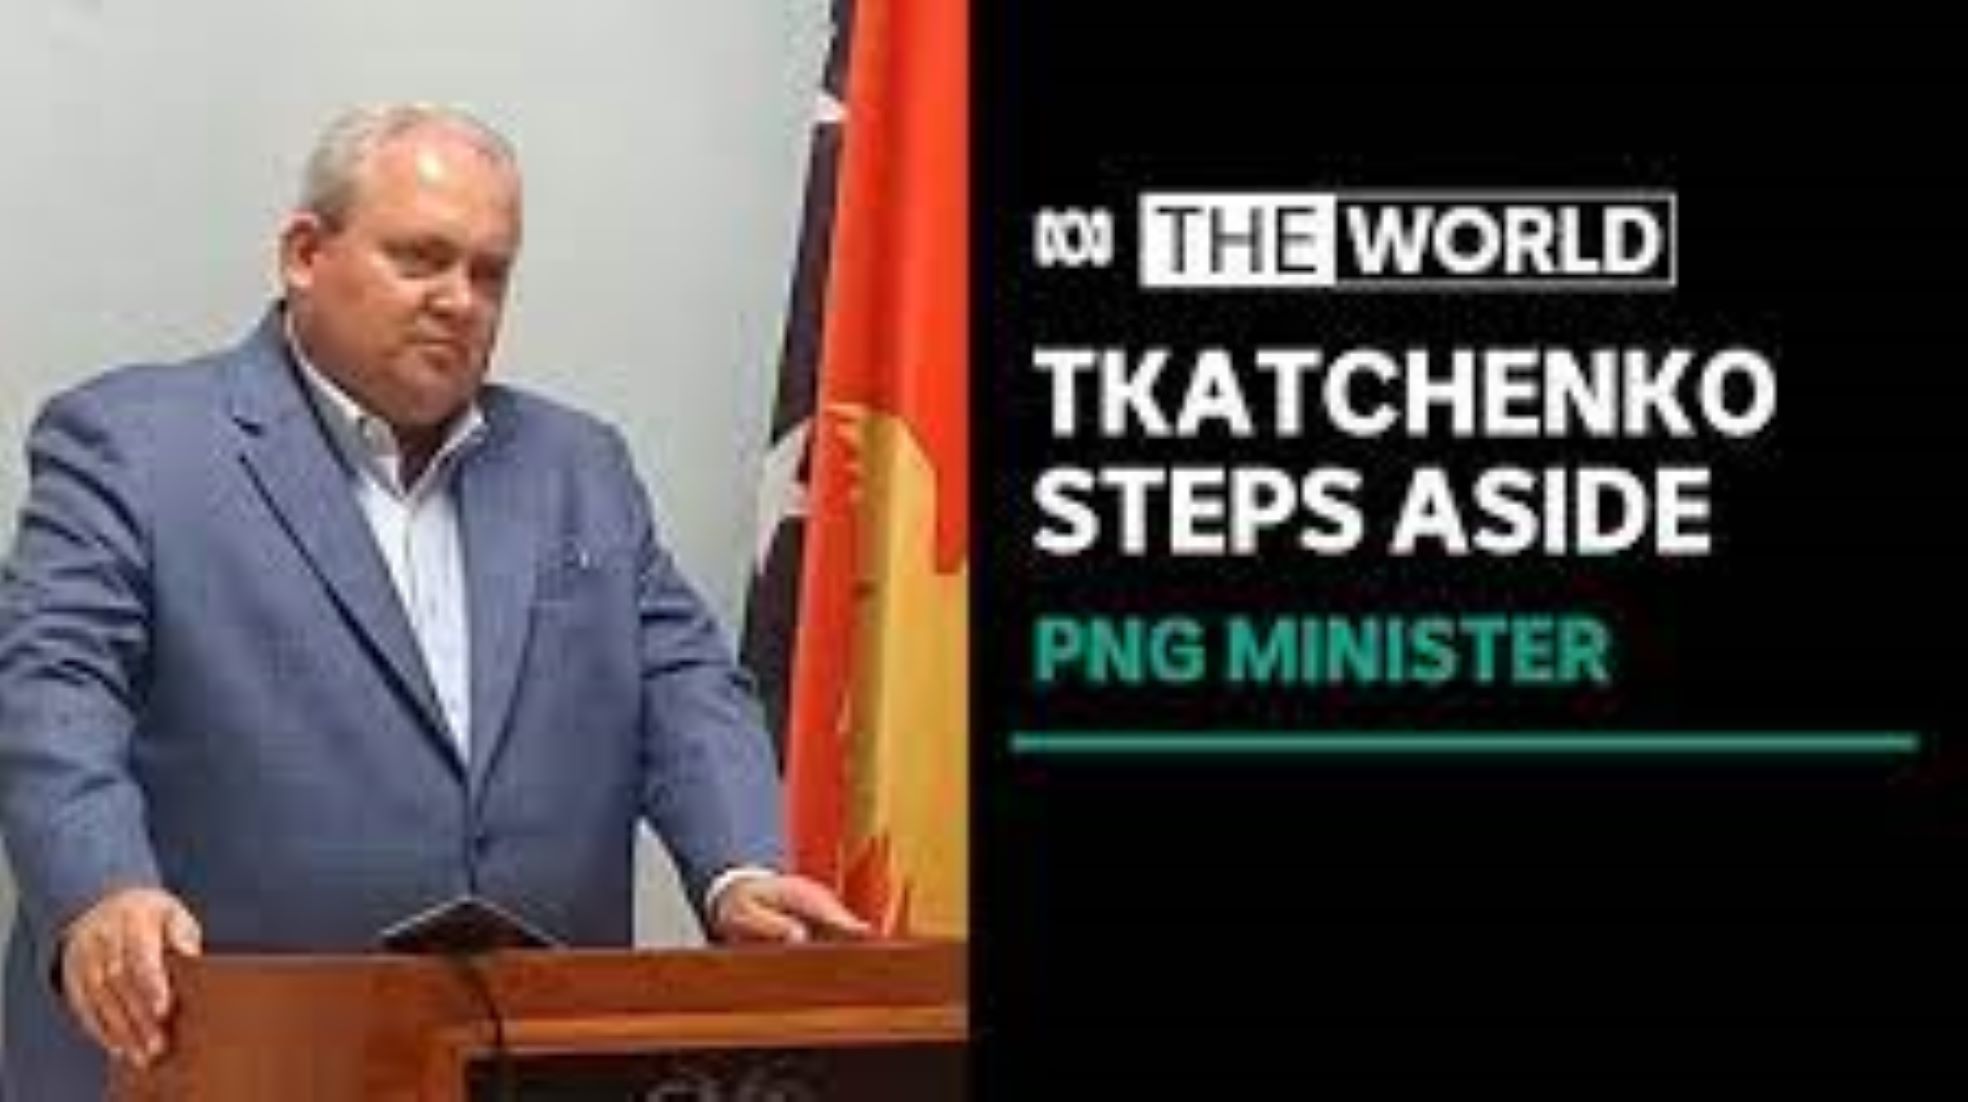 Papua New Guinea’s Foreign Minister Stepped Aside